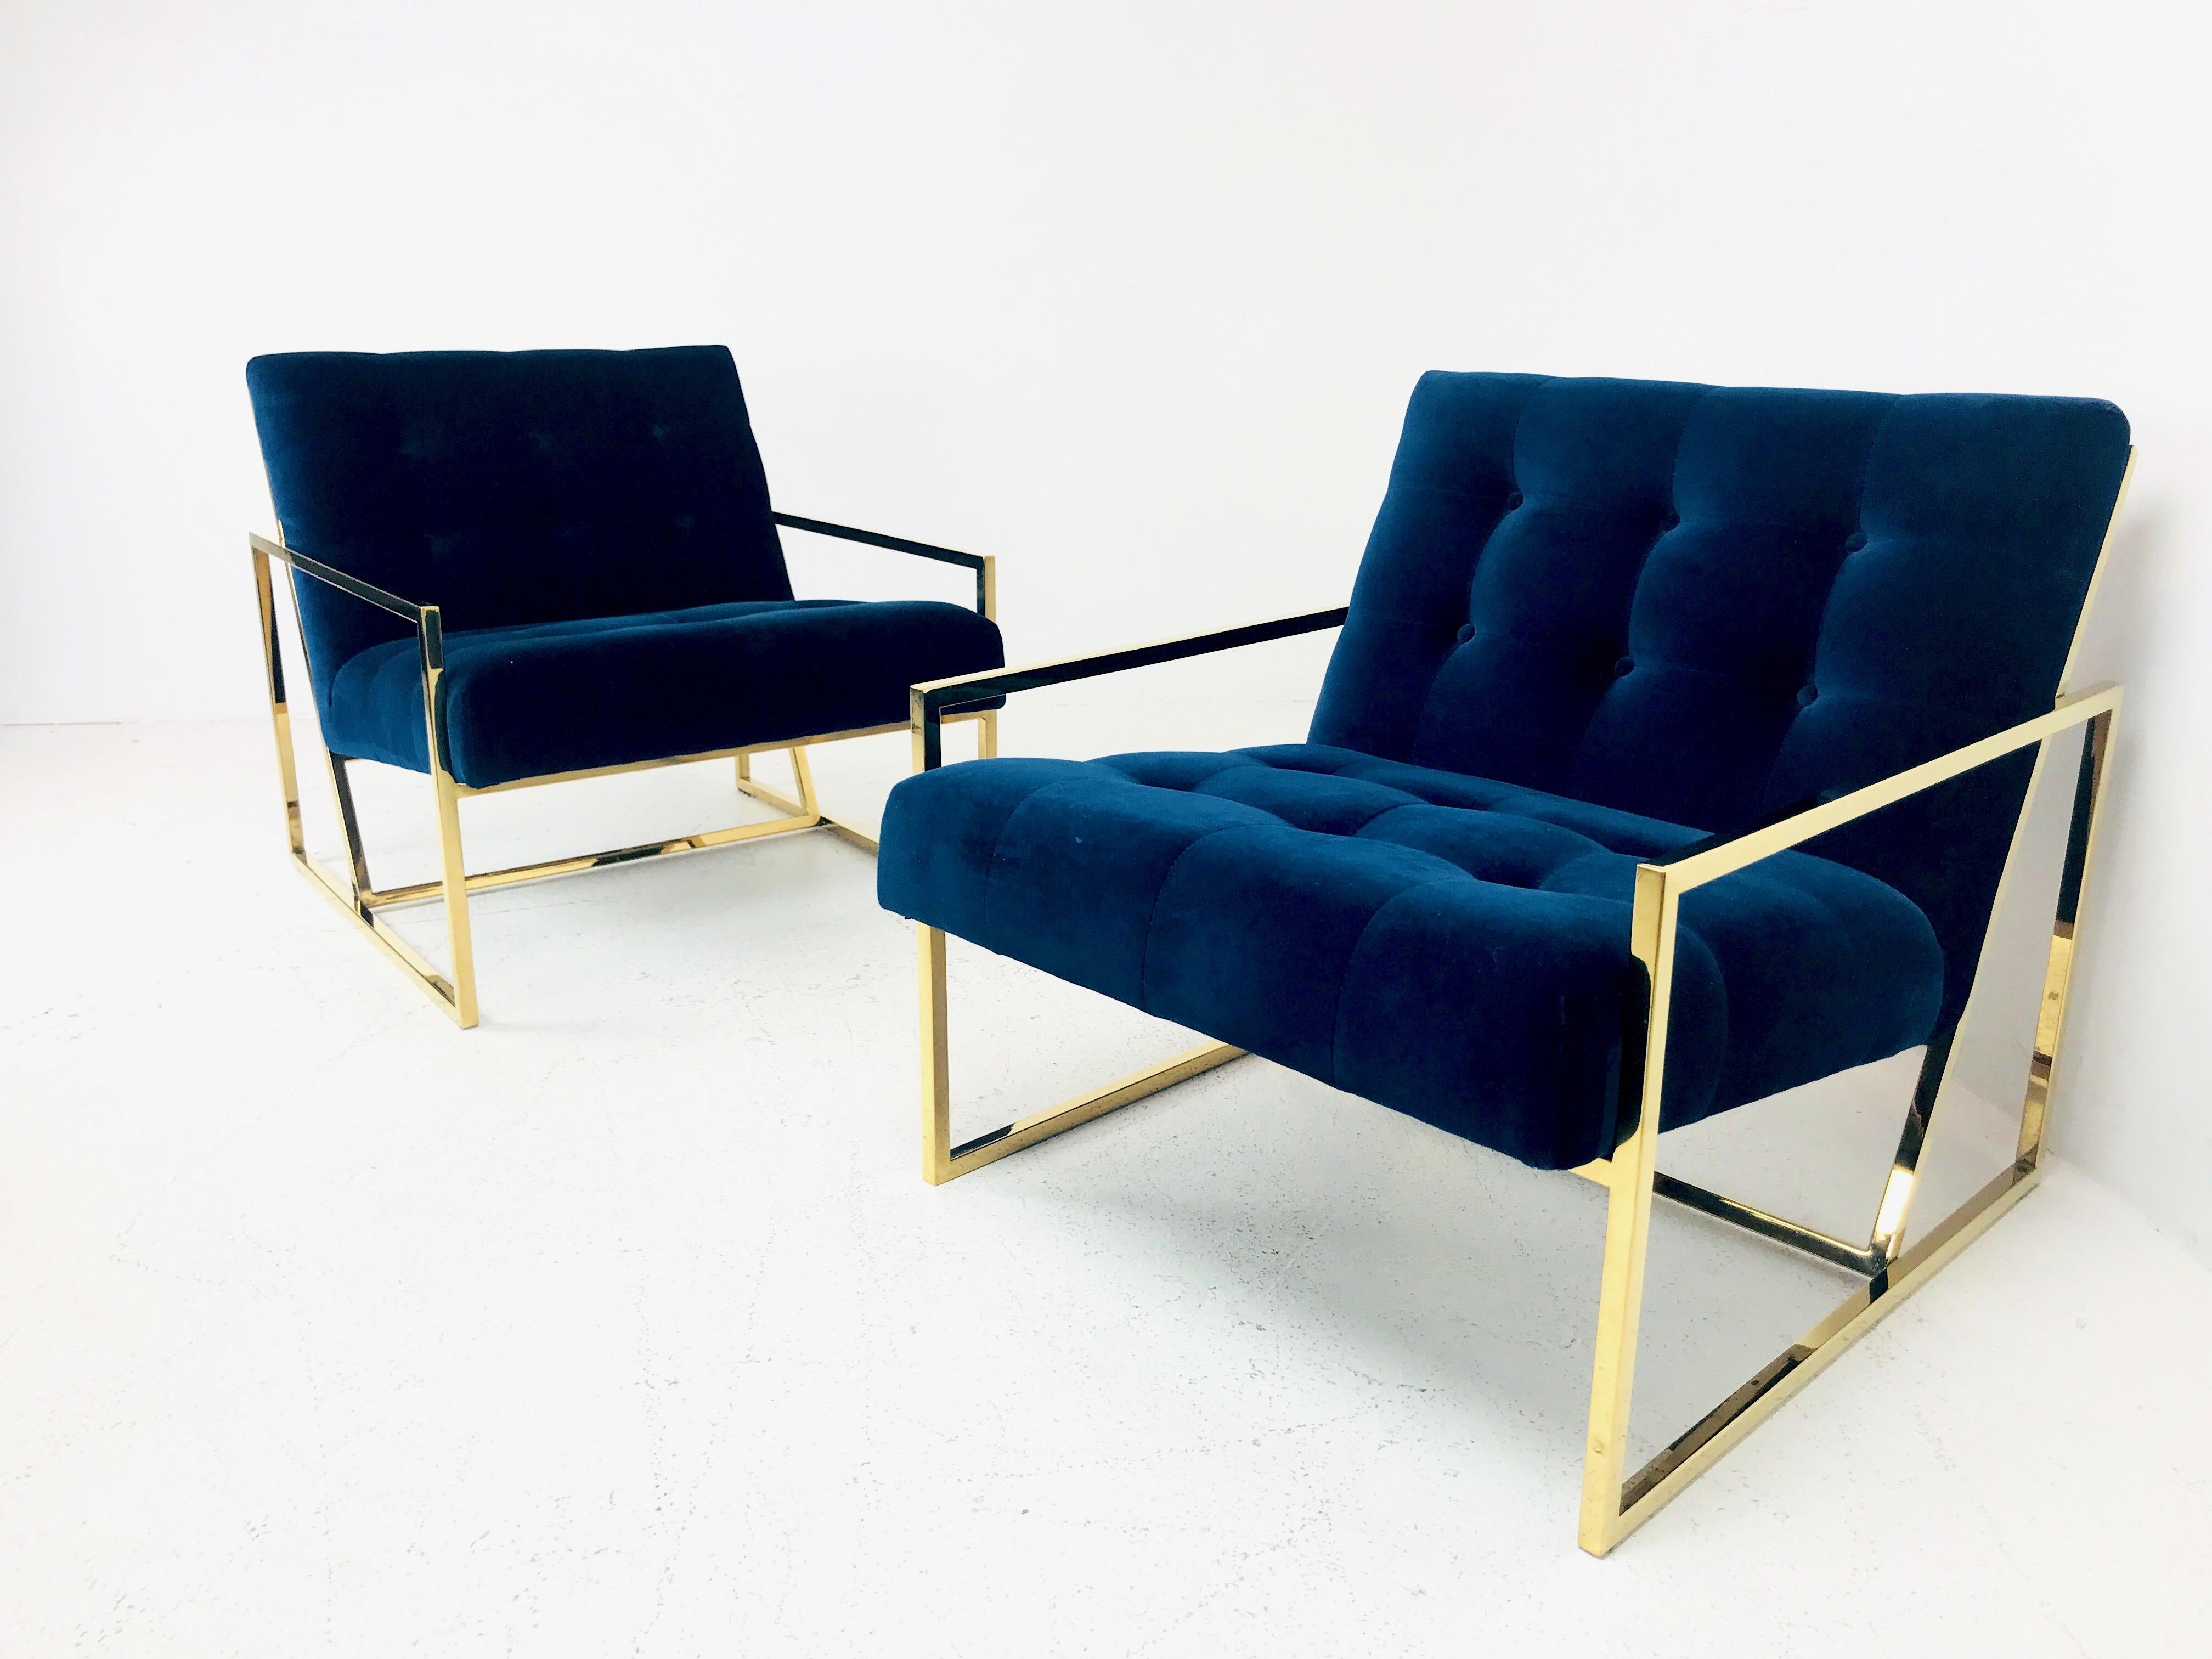 Pair of goldfinger lounge chairs by Jonathan Adler. The chairs are in good condition with minimal wear from use.

Dimensions:
27.5 W x 32 D x 27.5 T
Seat height 17.